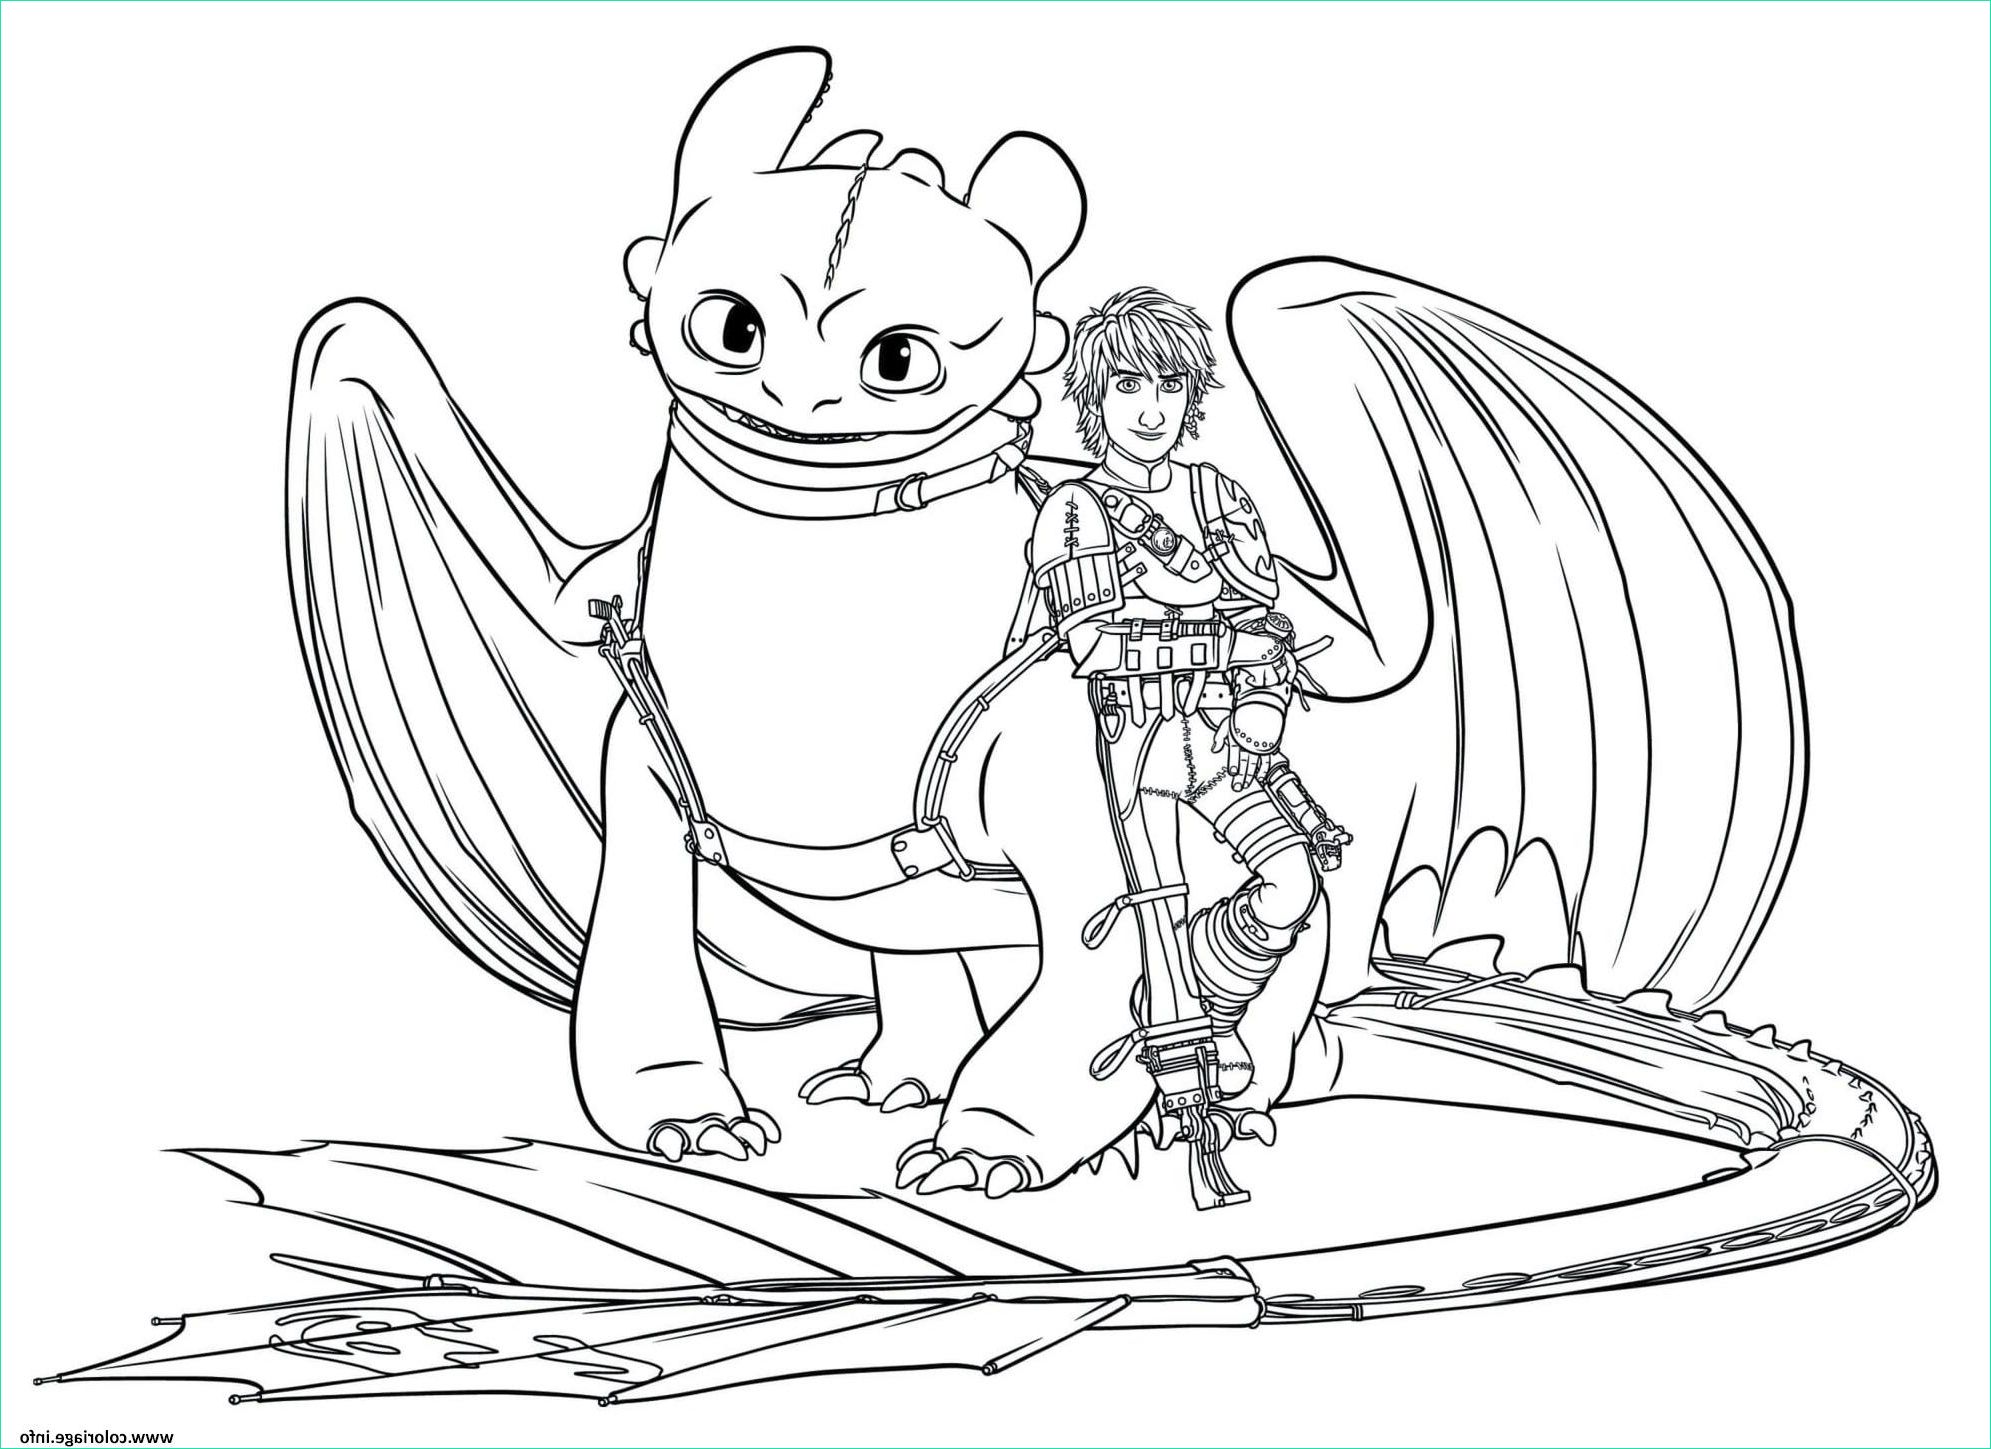 hiccup toothless dragon 3 coloriage dessin